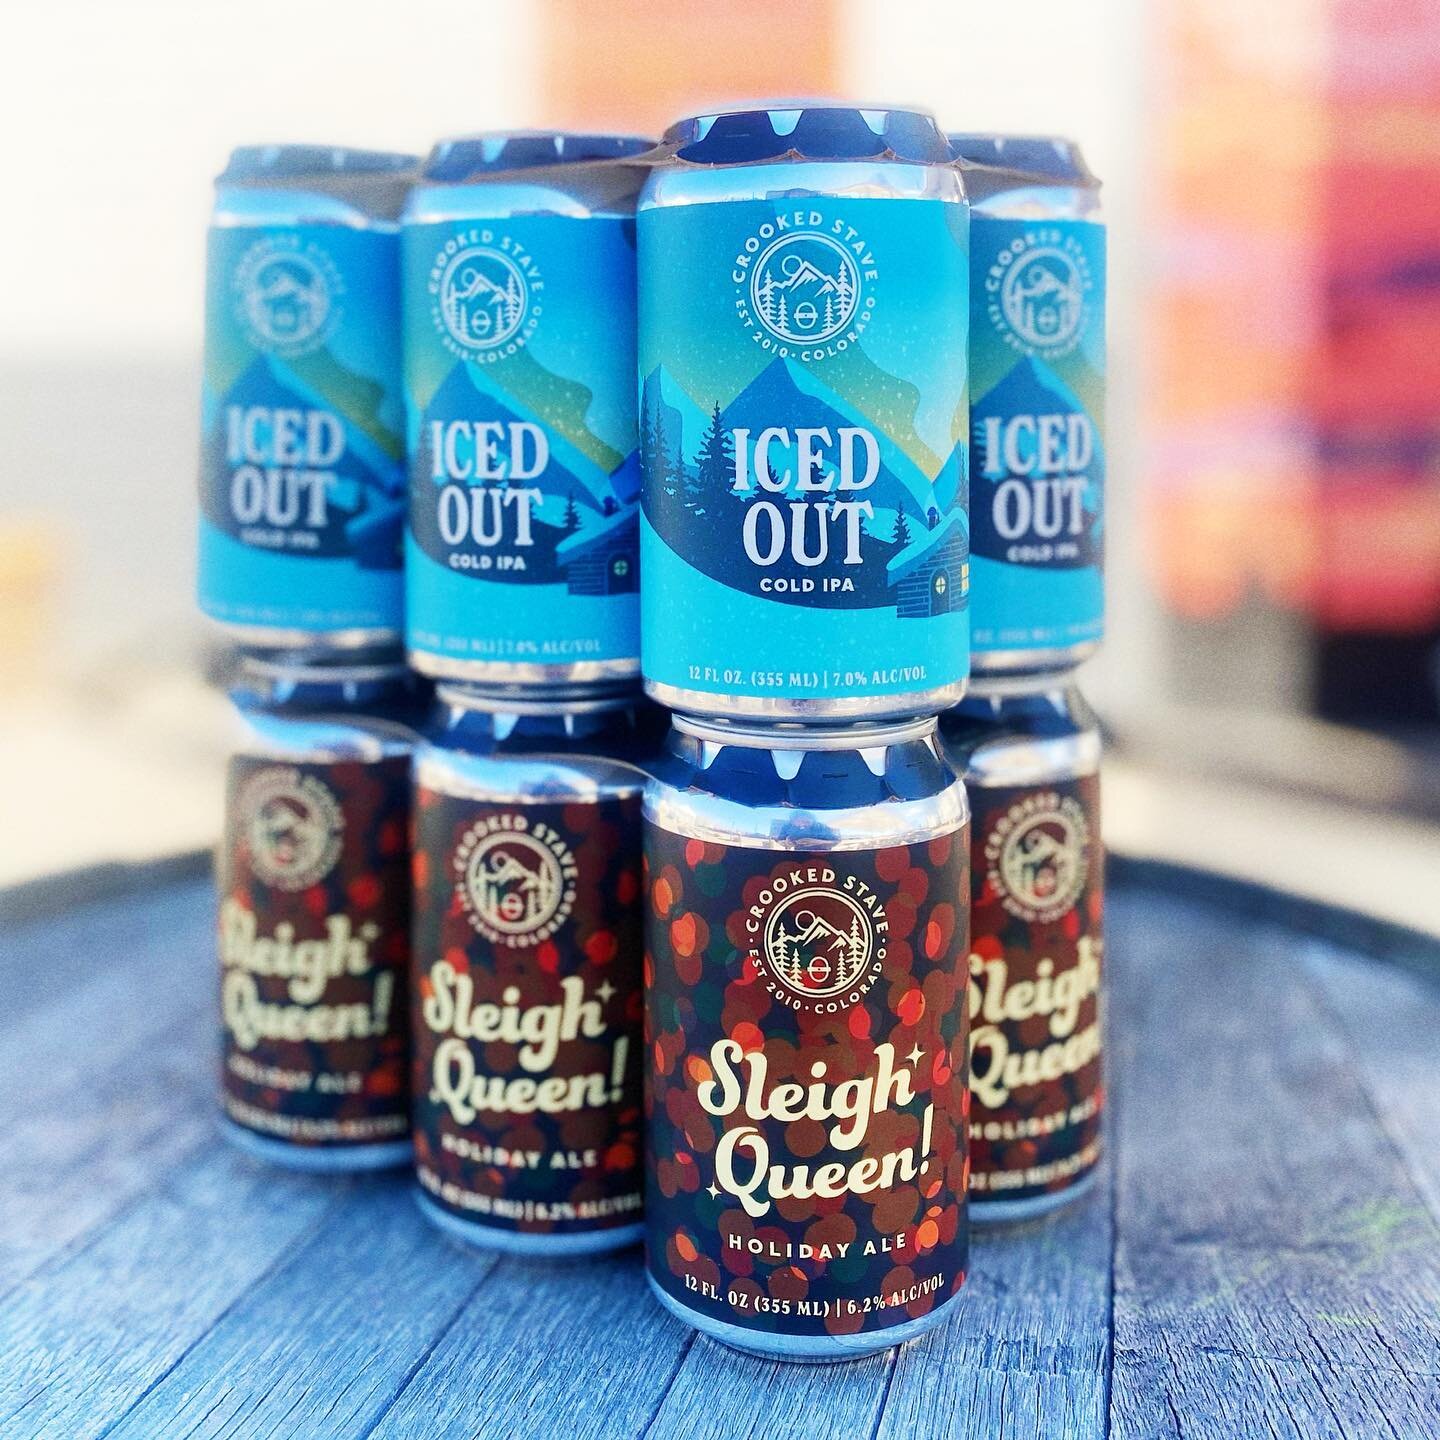 The perfect holiday brews to share with friends and family this week! 

❄️Iced Out cold IPA and Sleigh Queen spiced holiday ale.🛷